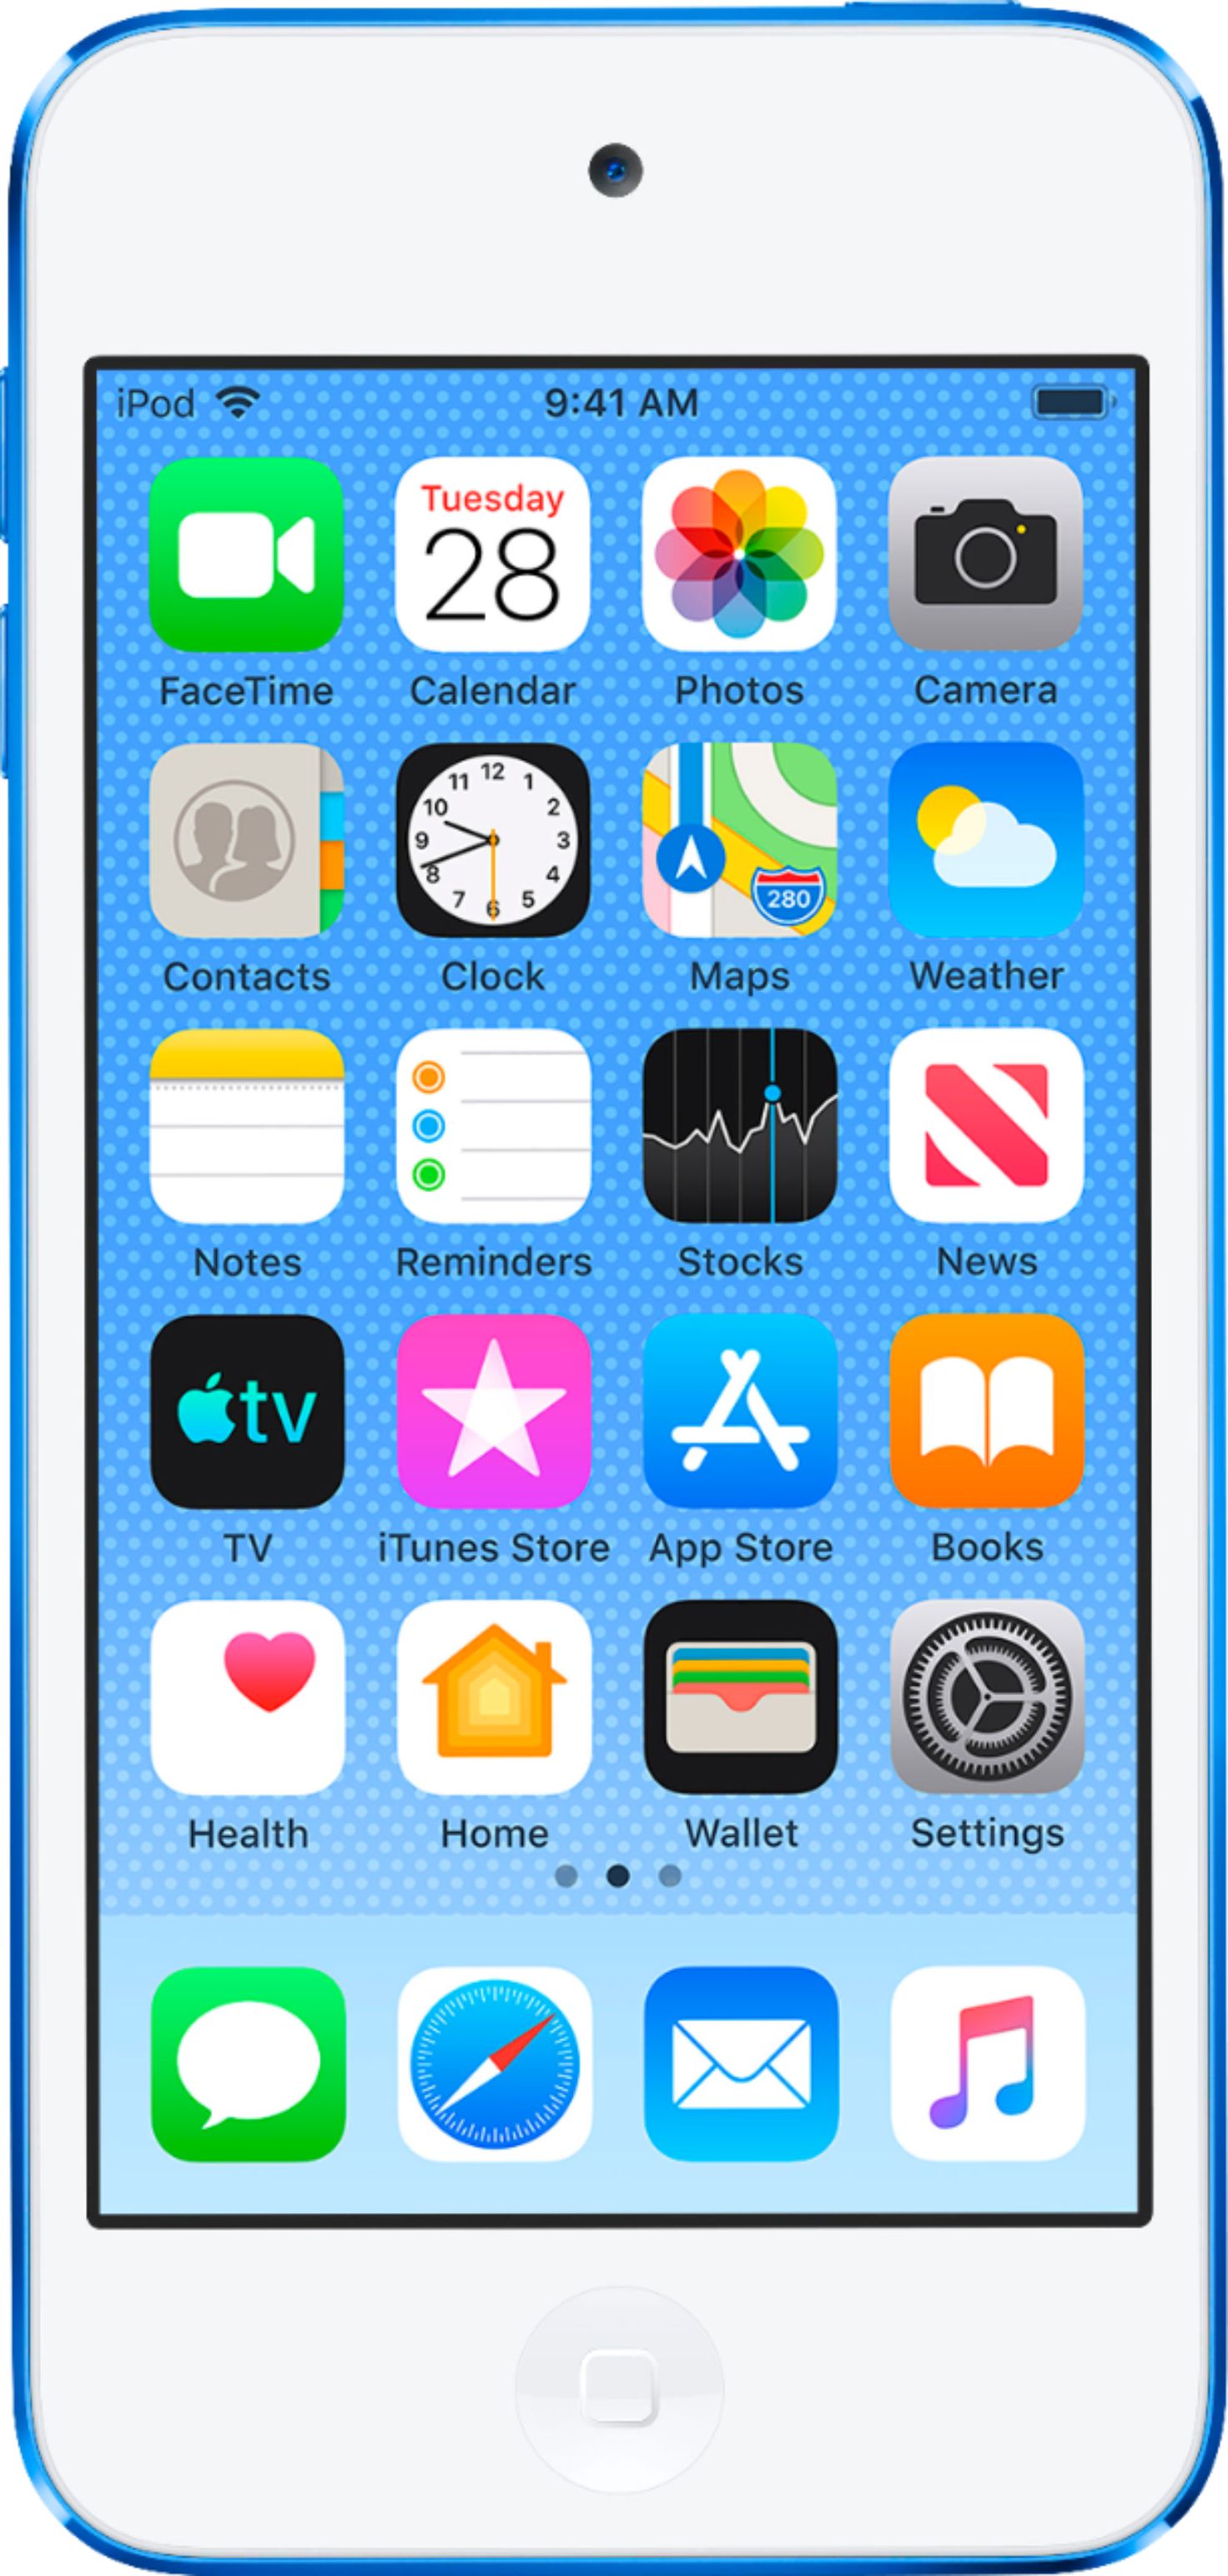 Apple - iPod touch® 32GB MP3 Player (7th Generation - Latest Model) - Blue